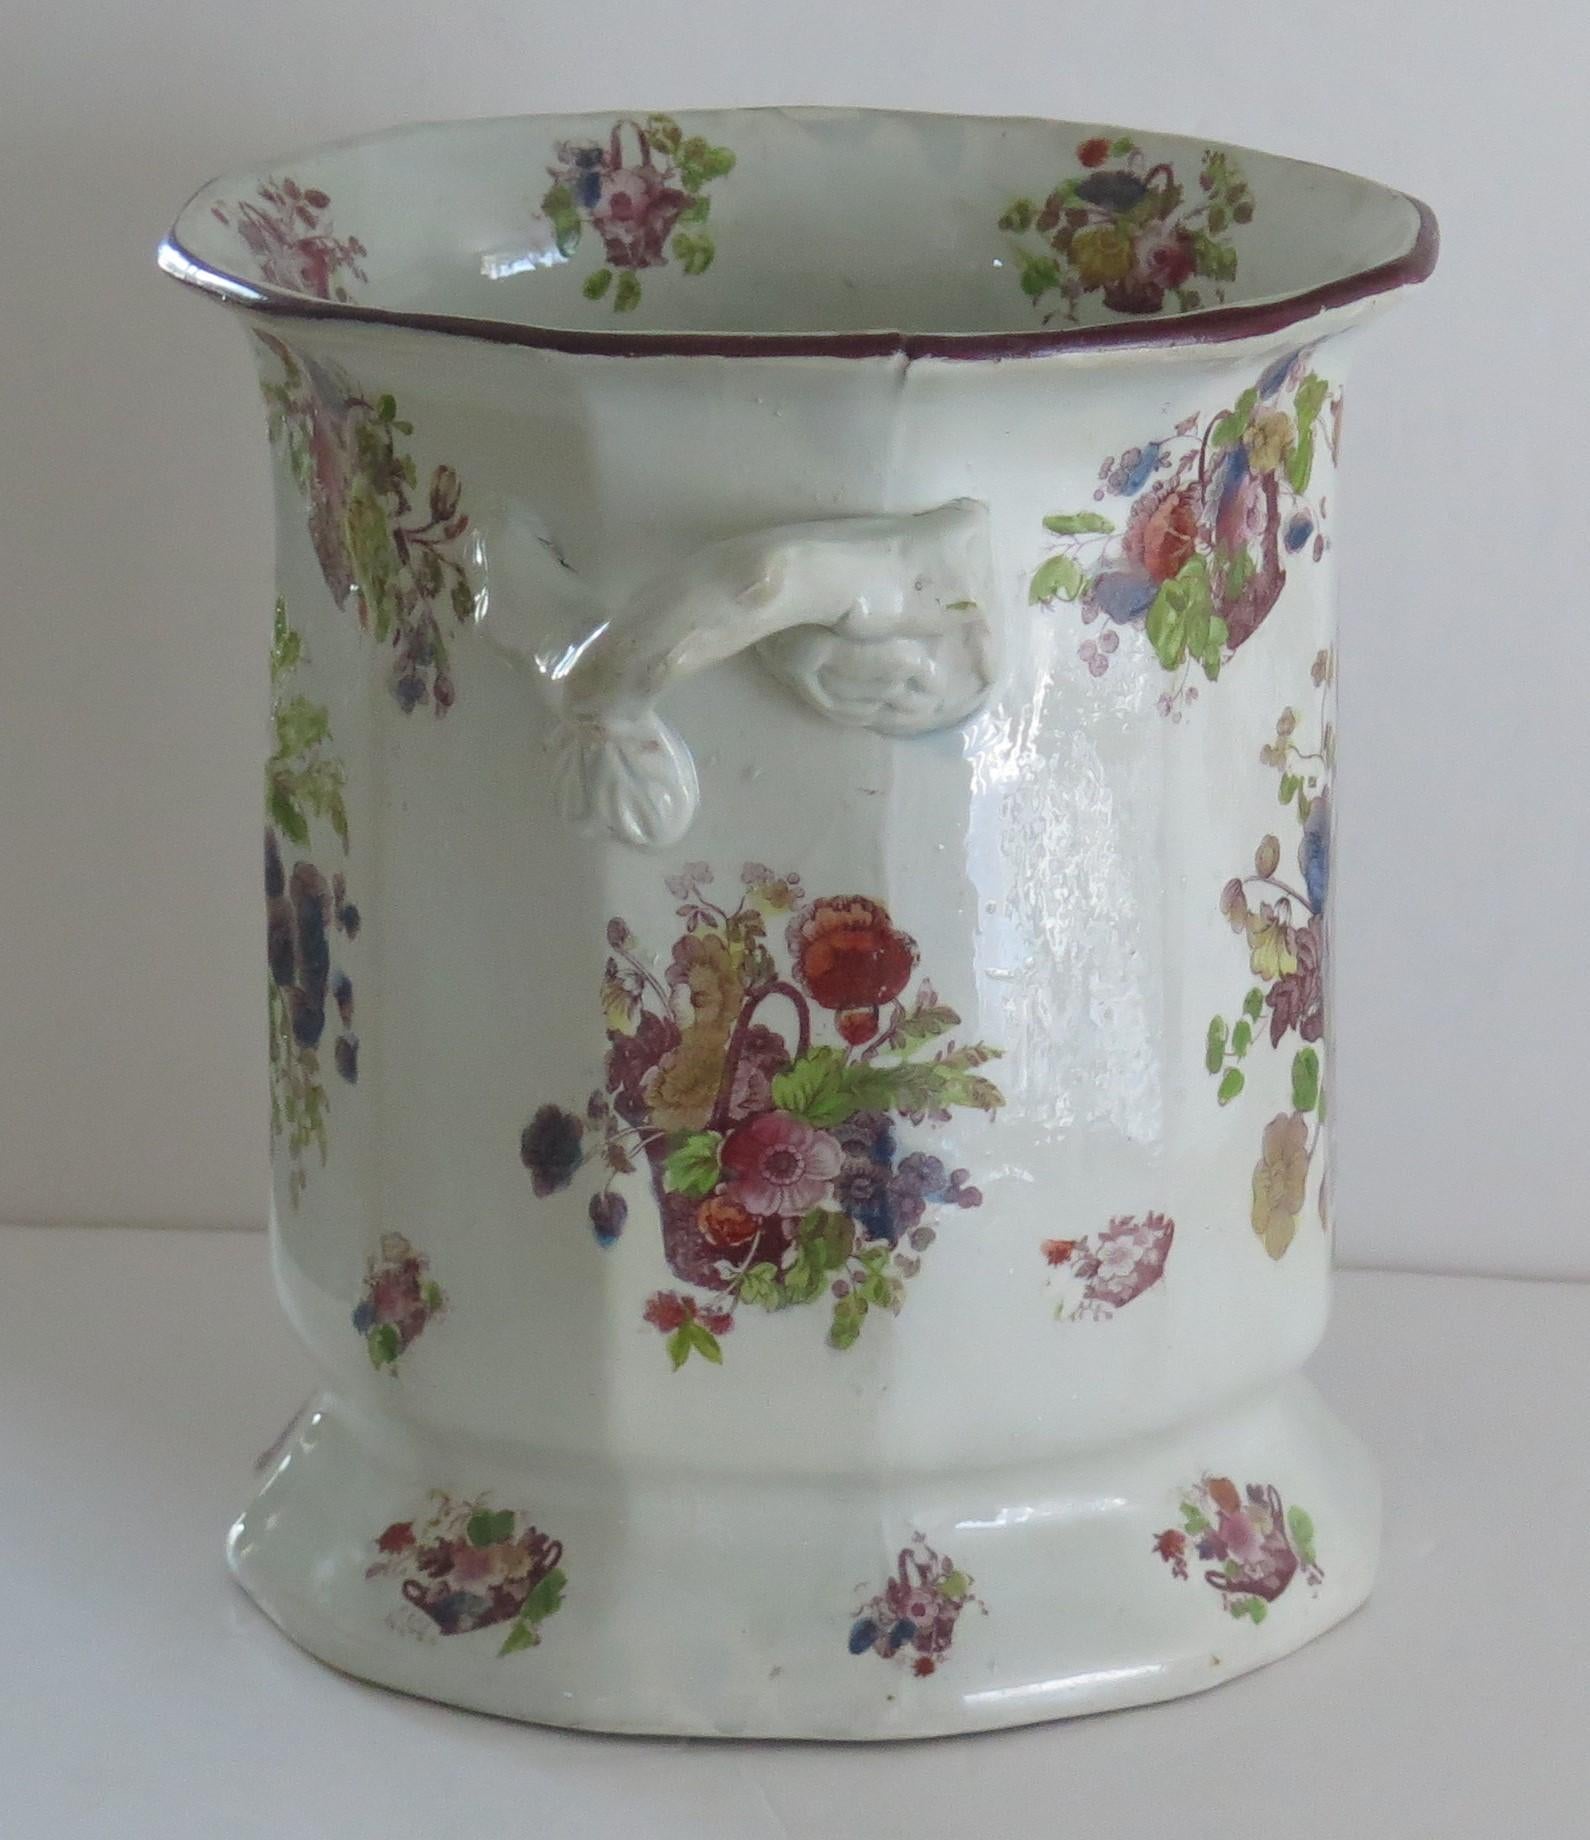 Large Masons Ironstone Wine Cooler or Ice Pail very rare, English circa 1818 For Sale 1